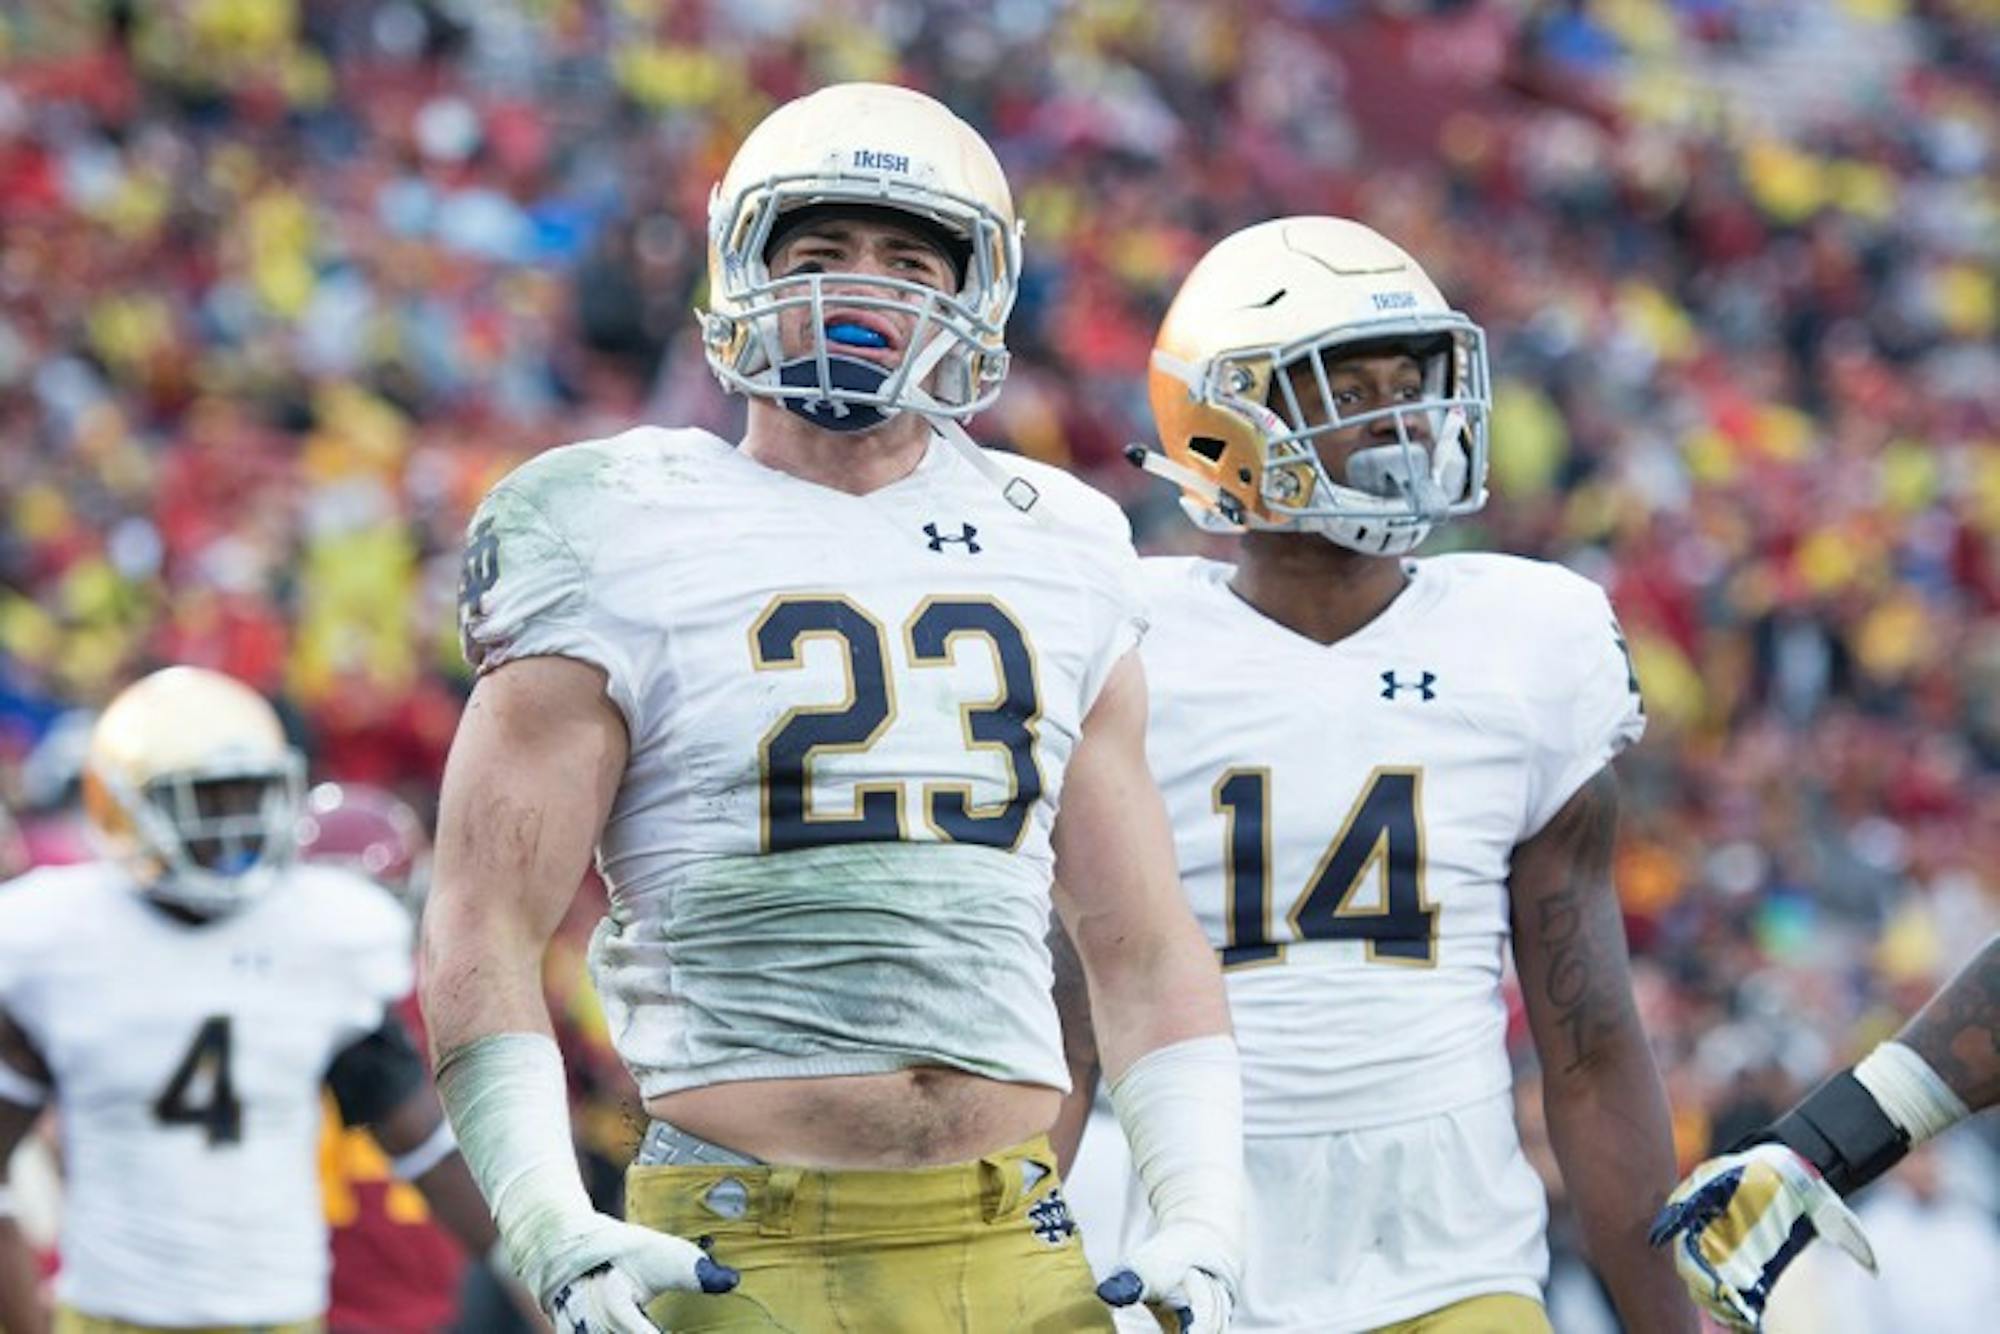 Irish junior safety Drue Tranquill looks to the sidelines following a pass interference call during Notre Dame's 45-27 loss to USC on Saturday at Los Angeles Memorial Coliseum.